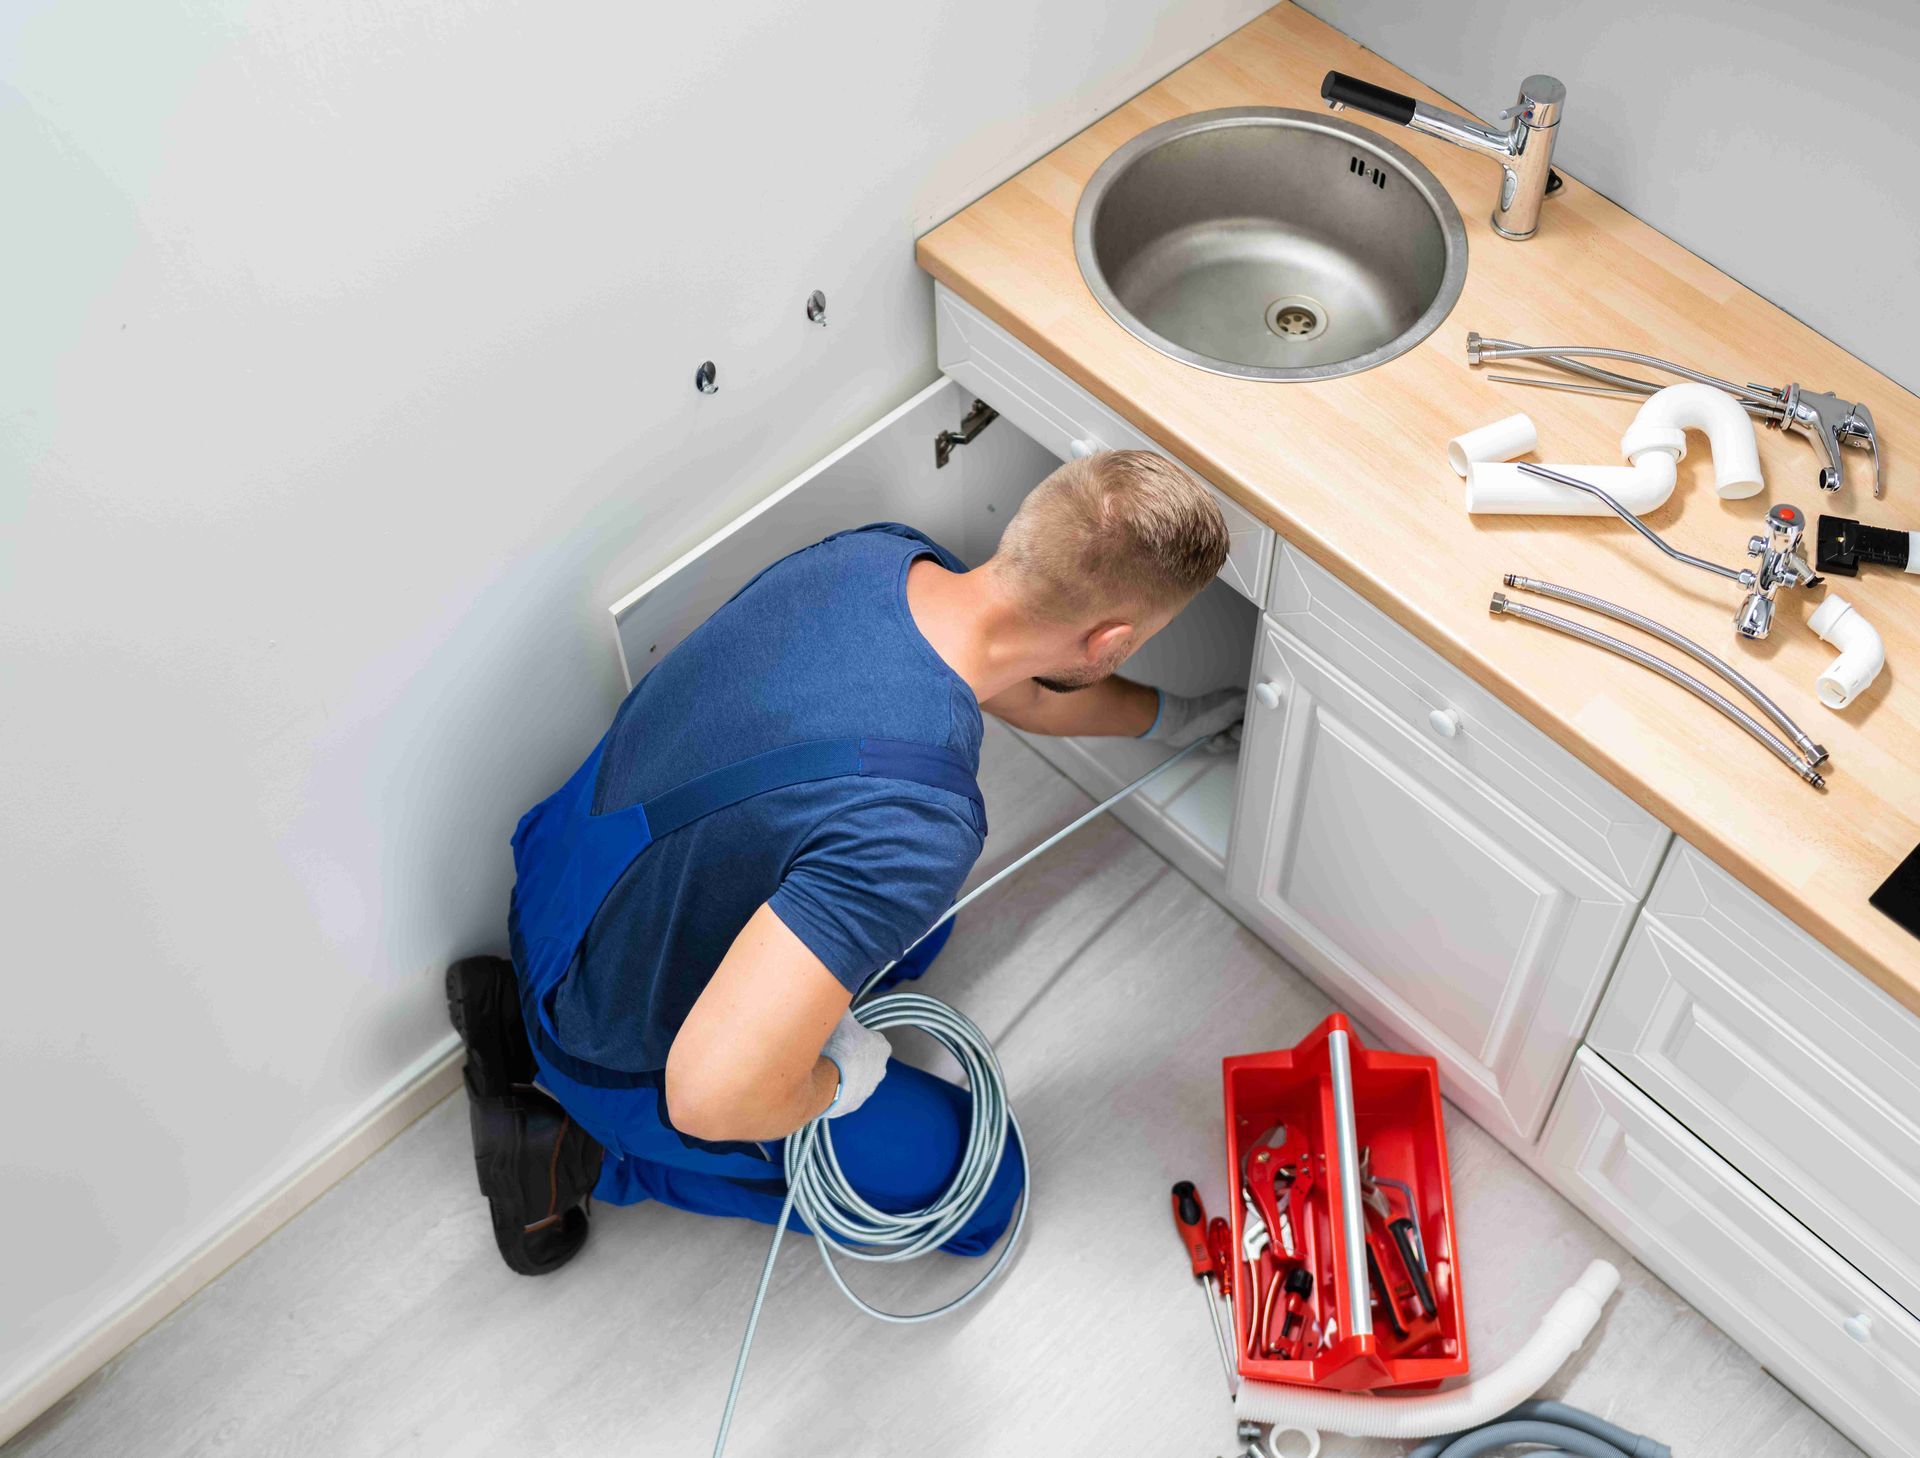 a plumber is working under a sink in a kitchen